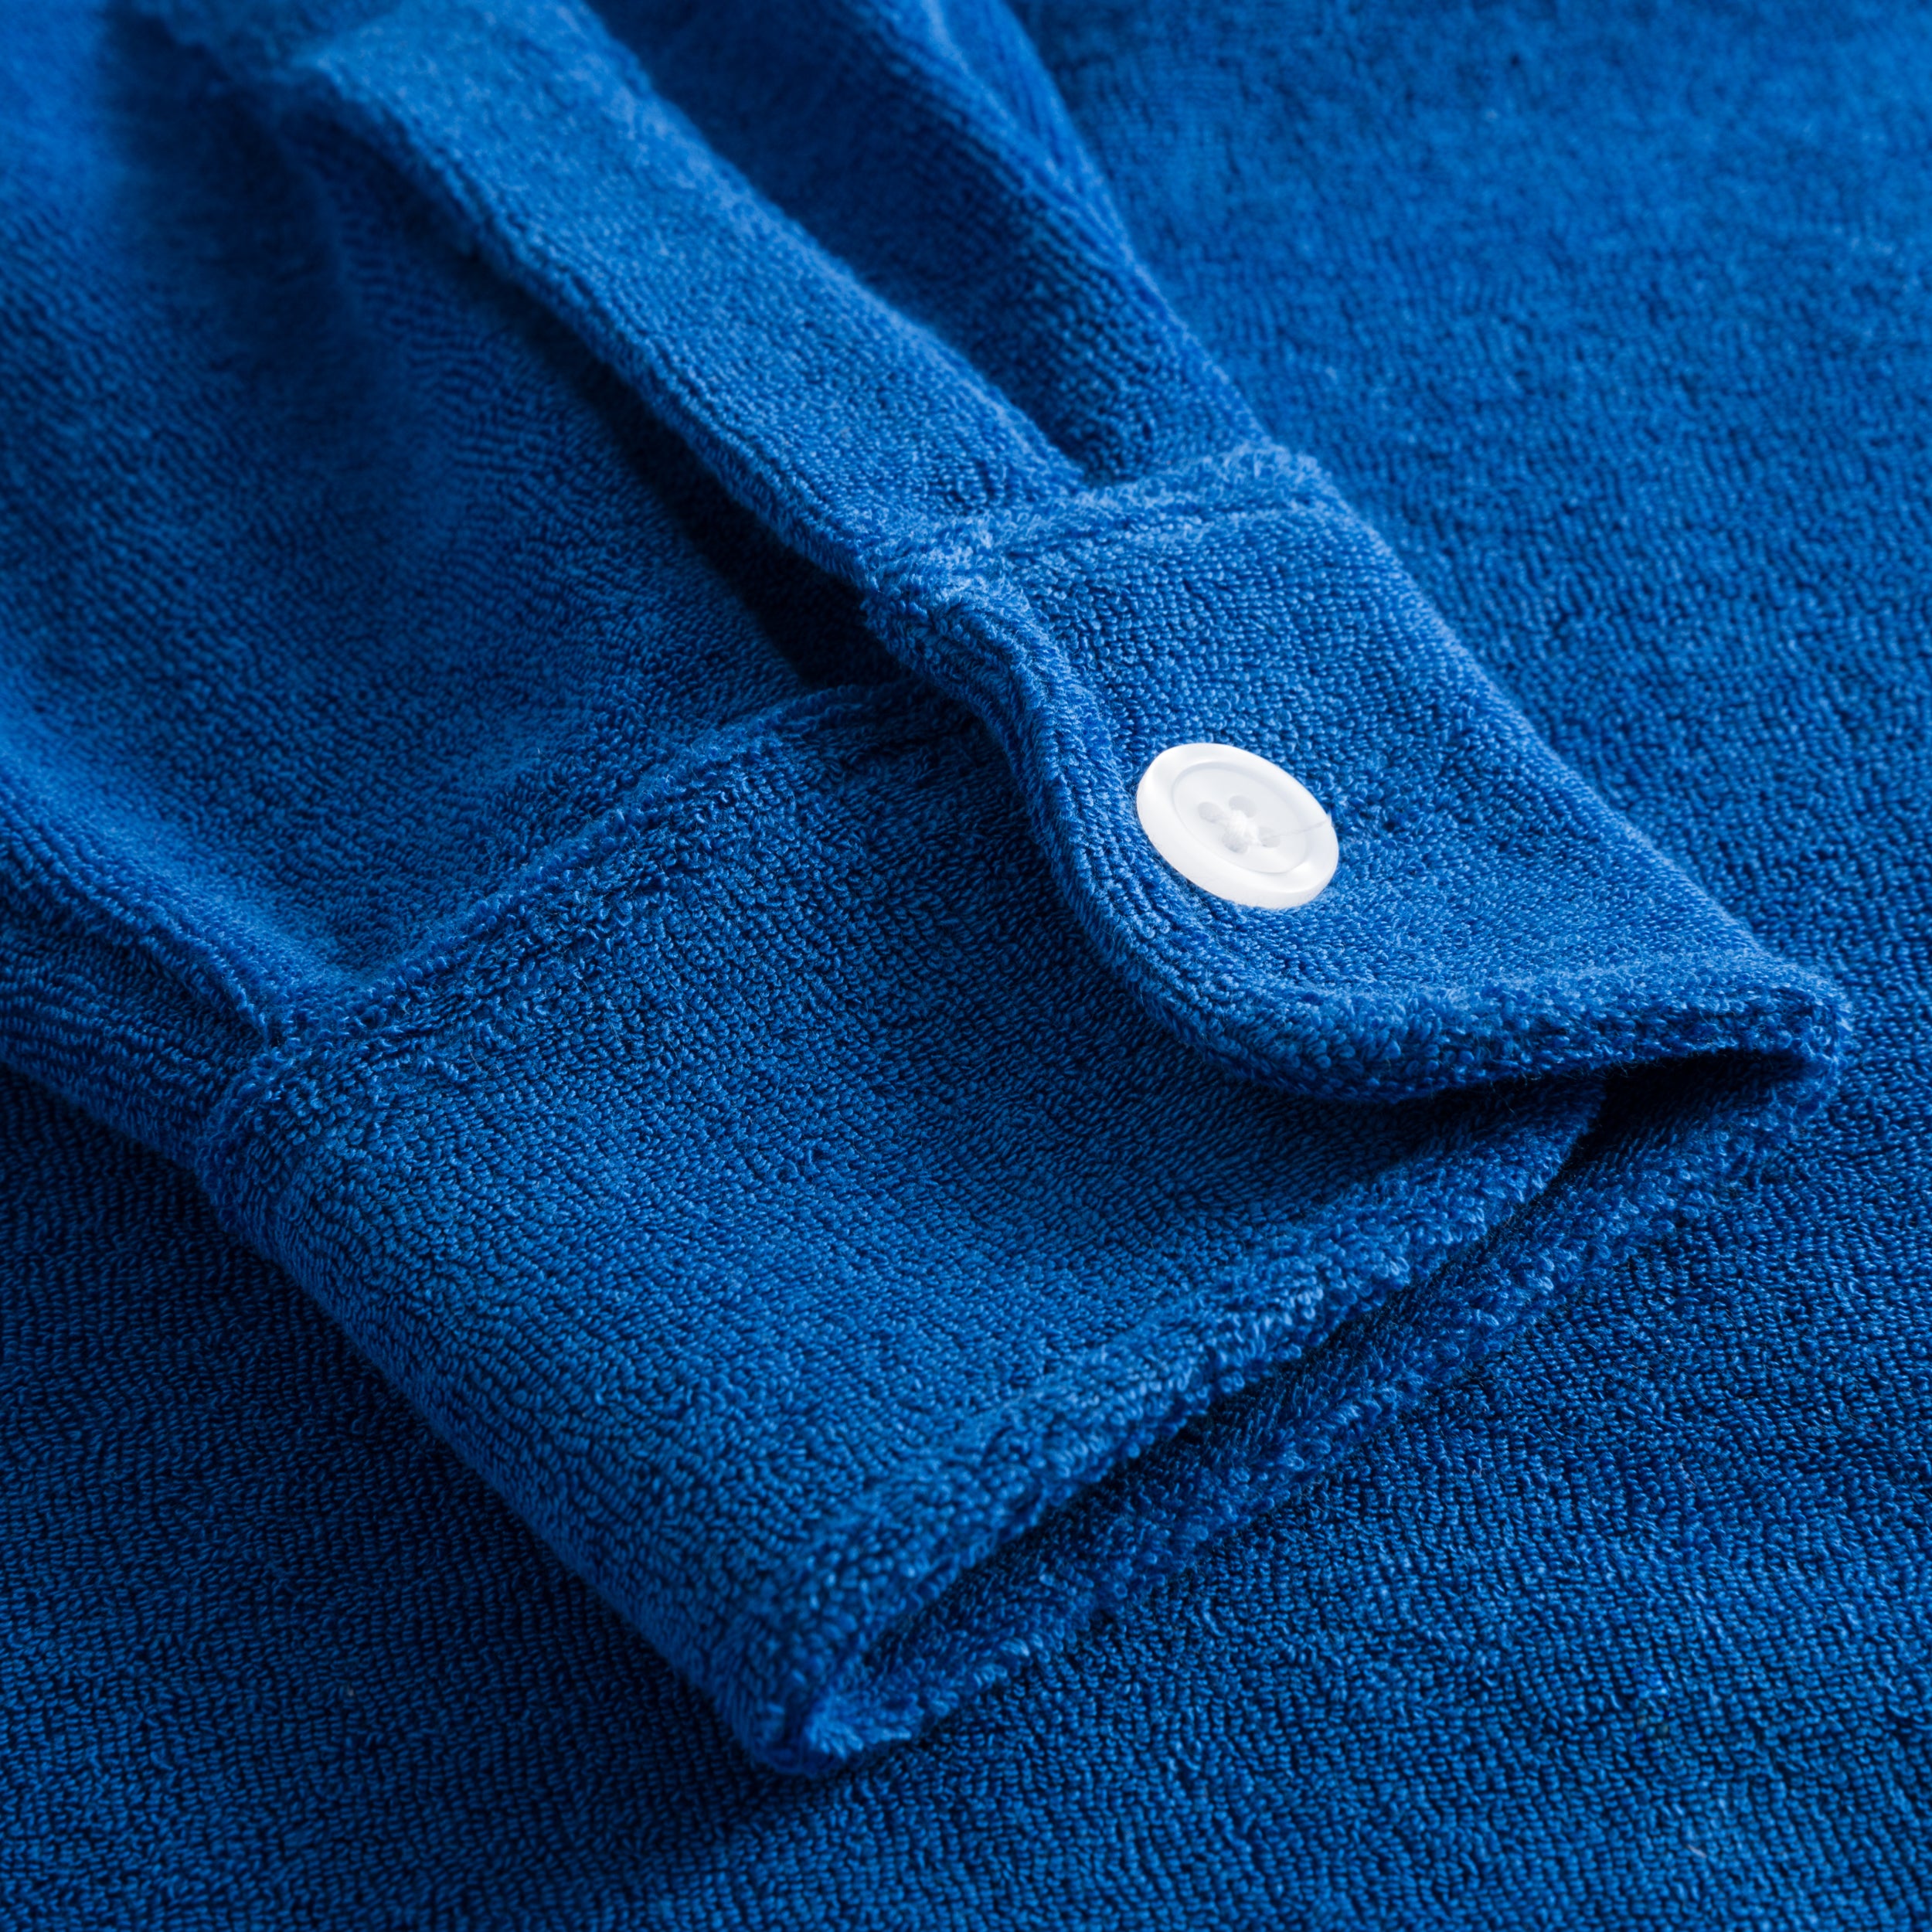 Sleeve on indigo blue shirt in terry towelling fabric